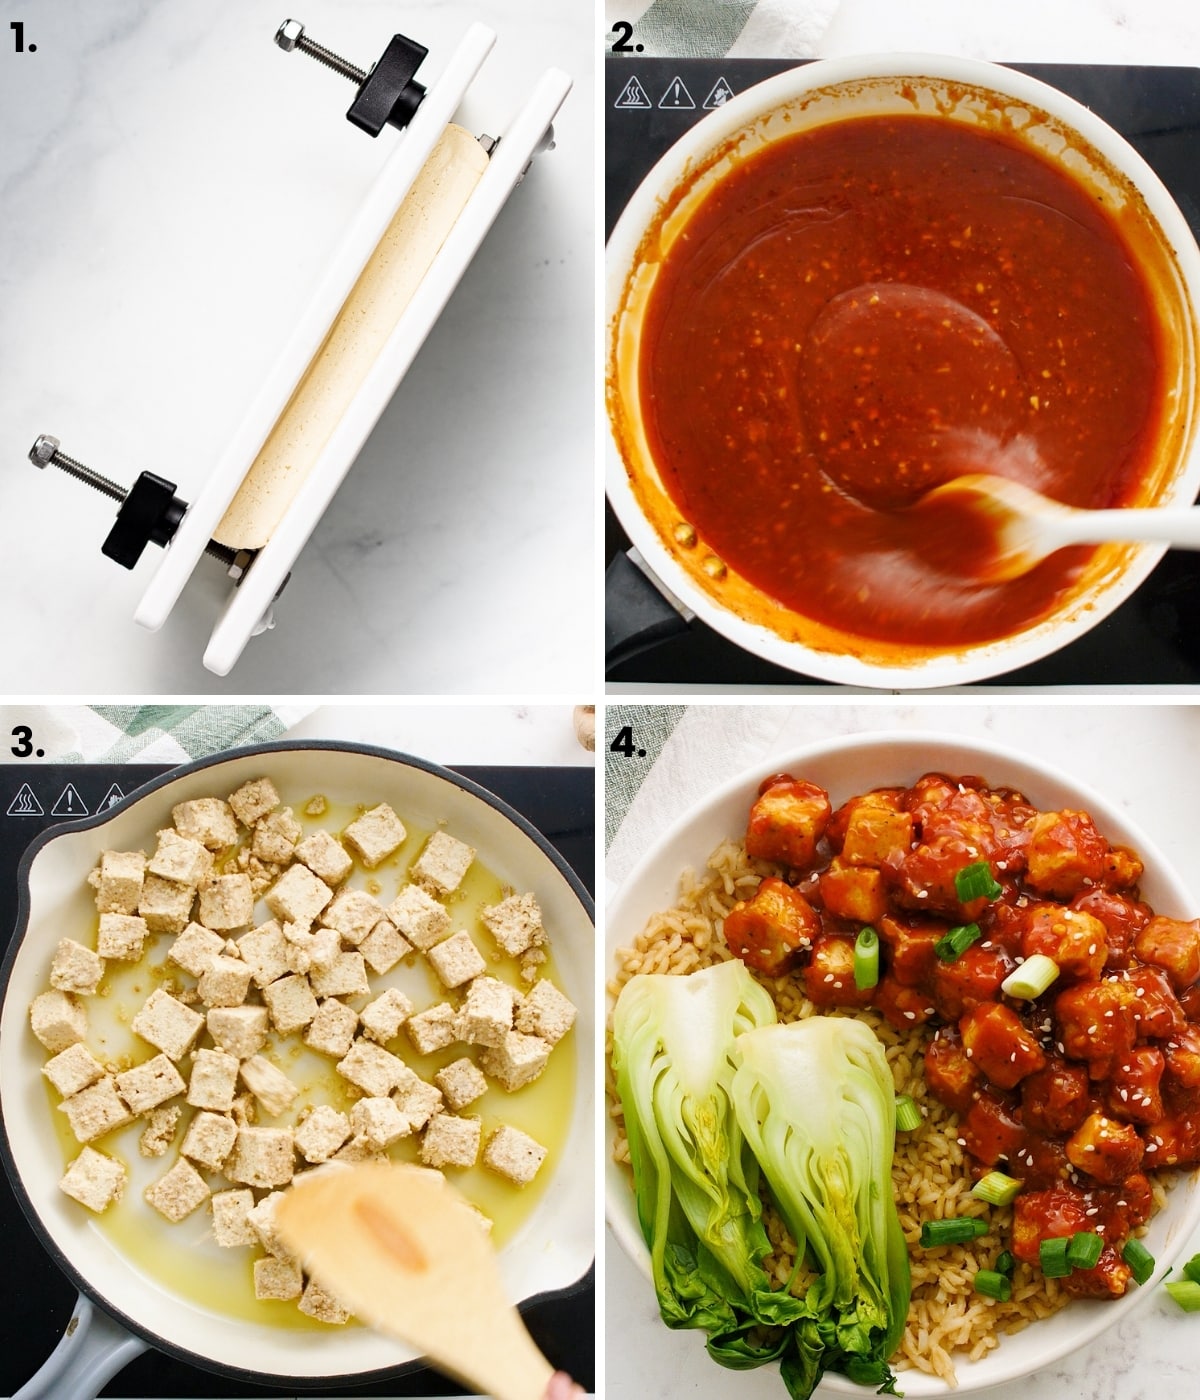 process photos showing how to make five spice tofu as per the written recipe